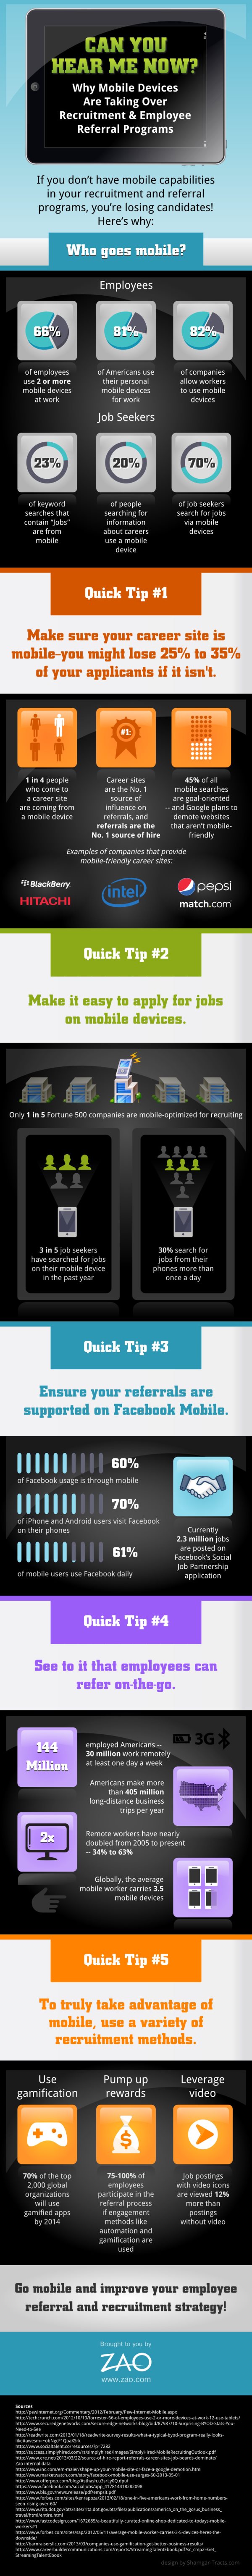 Zao Mobile Referral Infographic